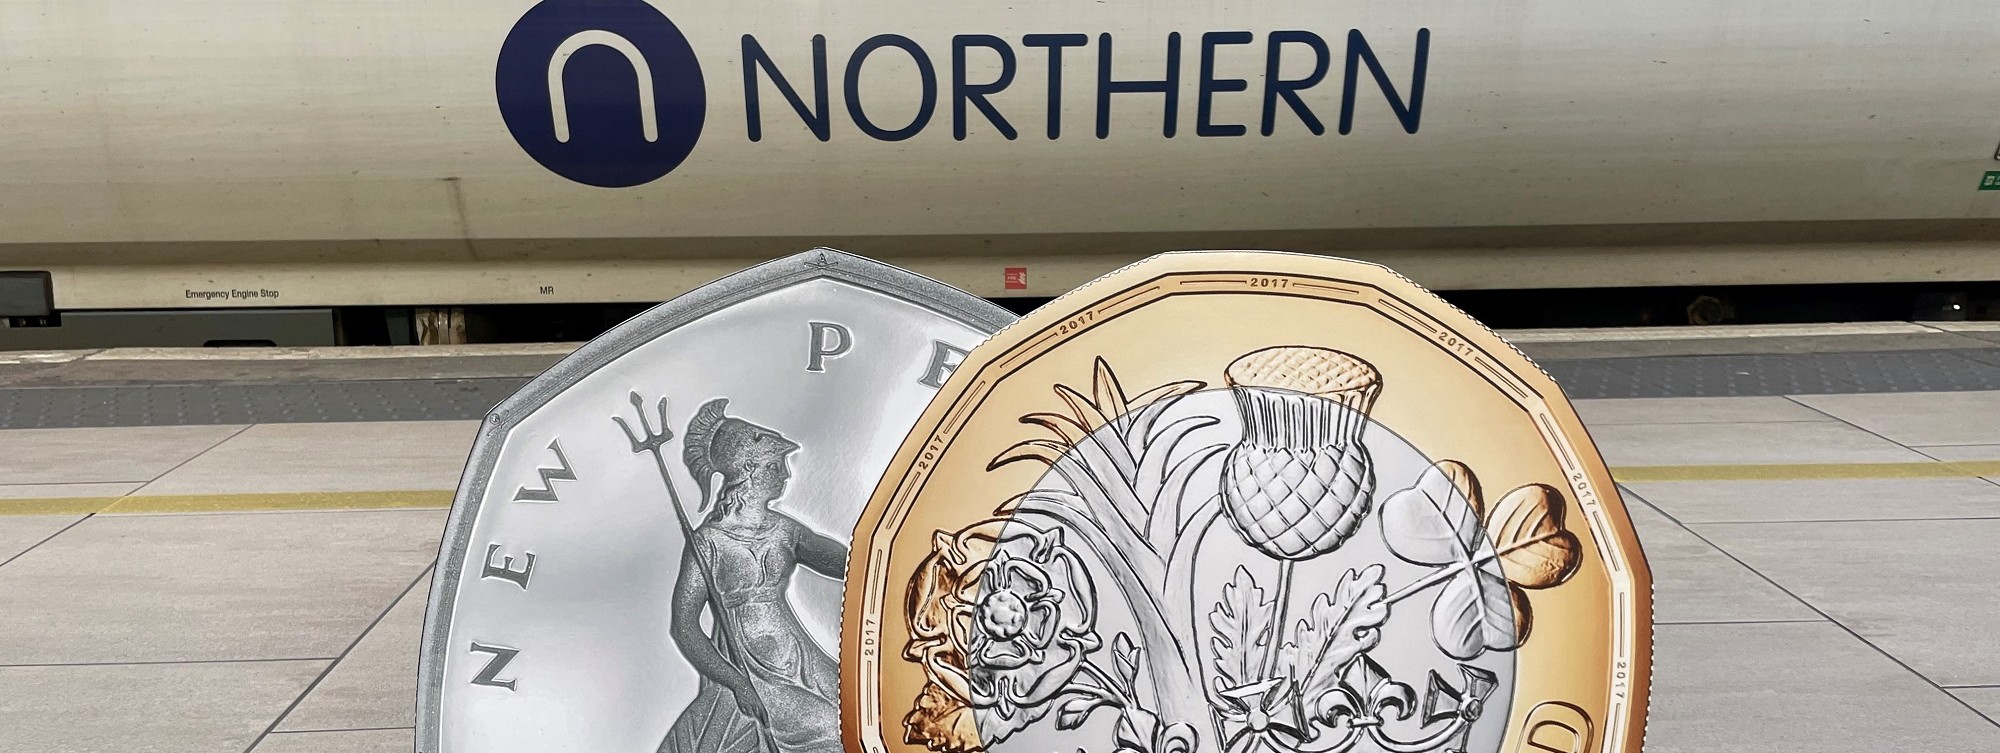 image-shows-1-coin-and-50p-piece-alongside-a-northern-train-2